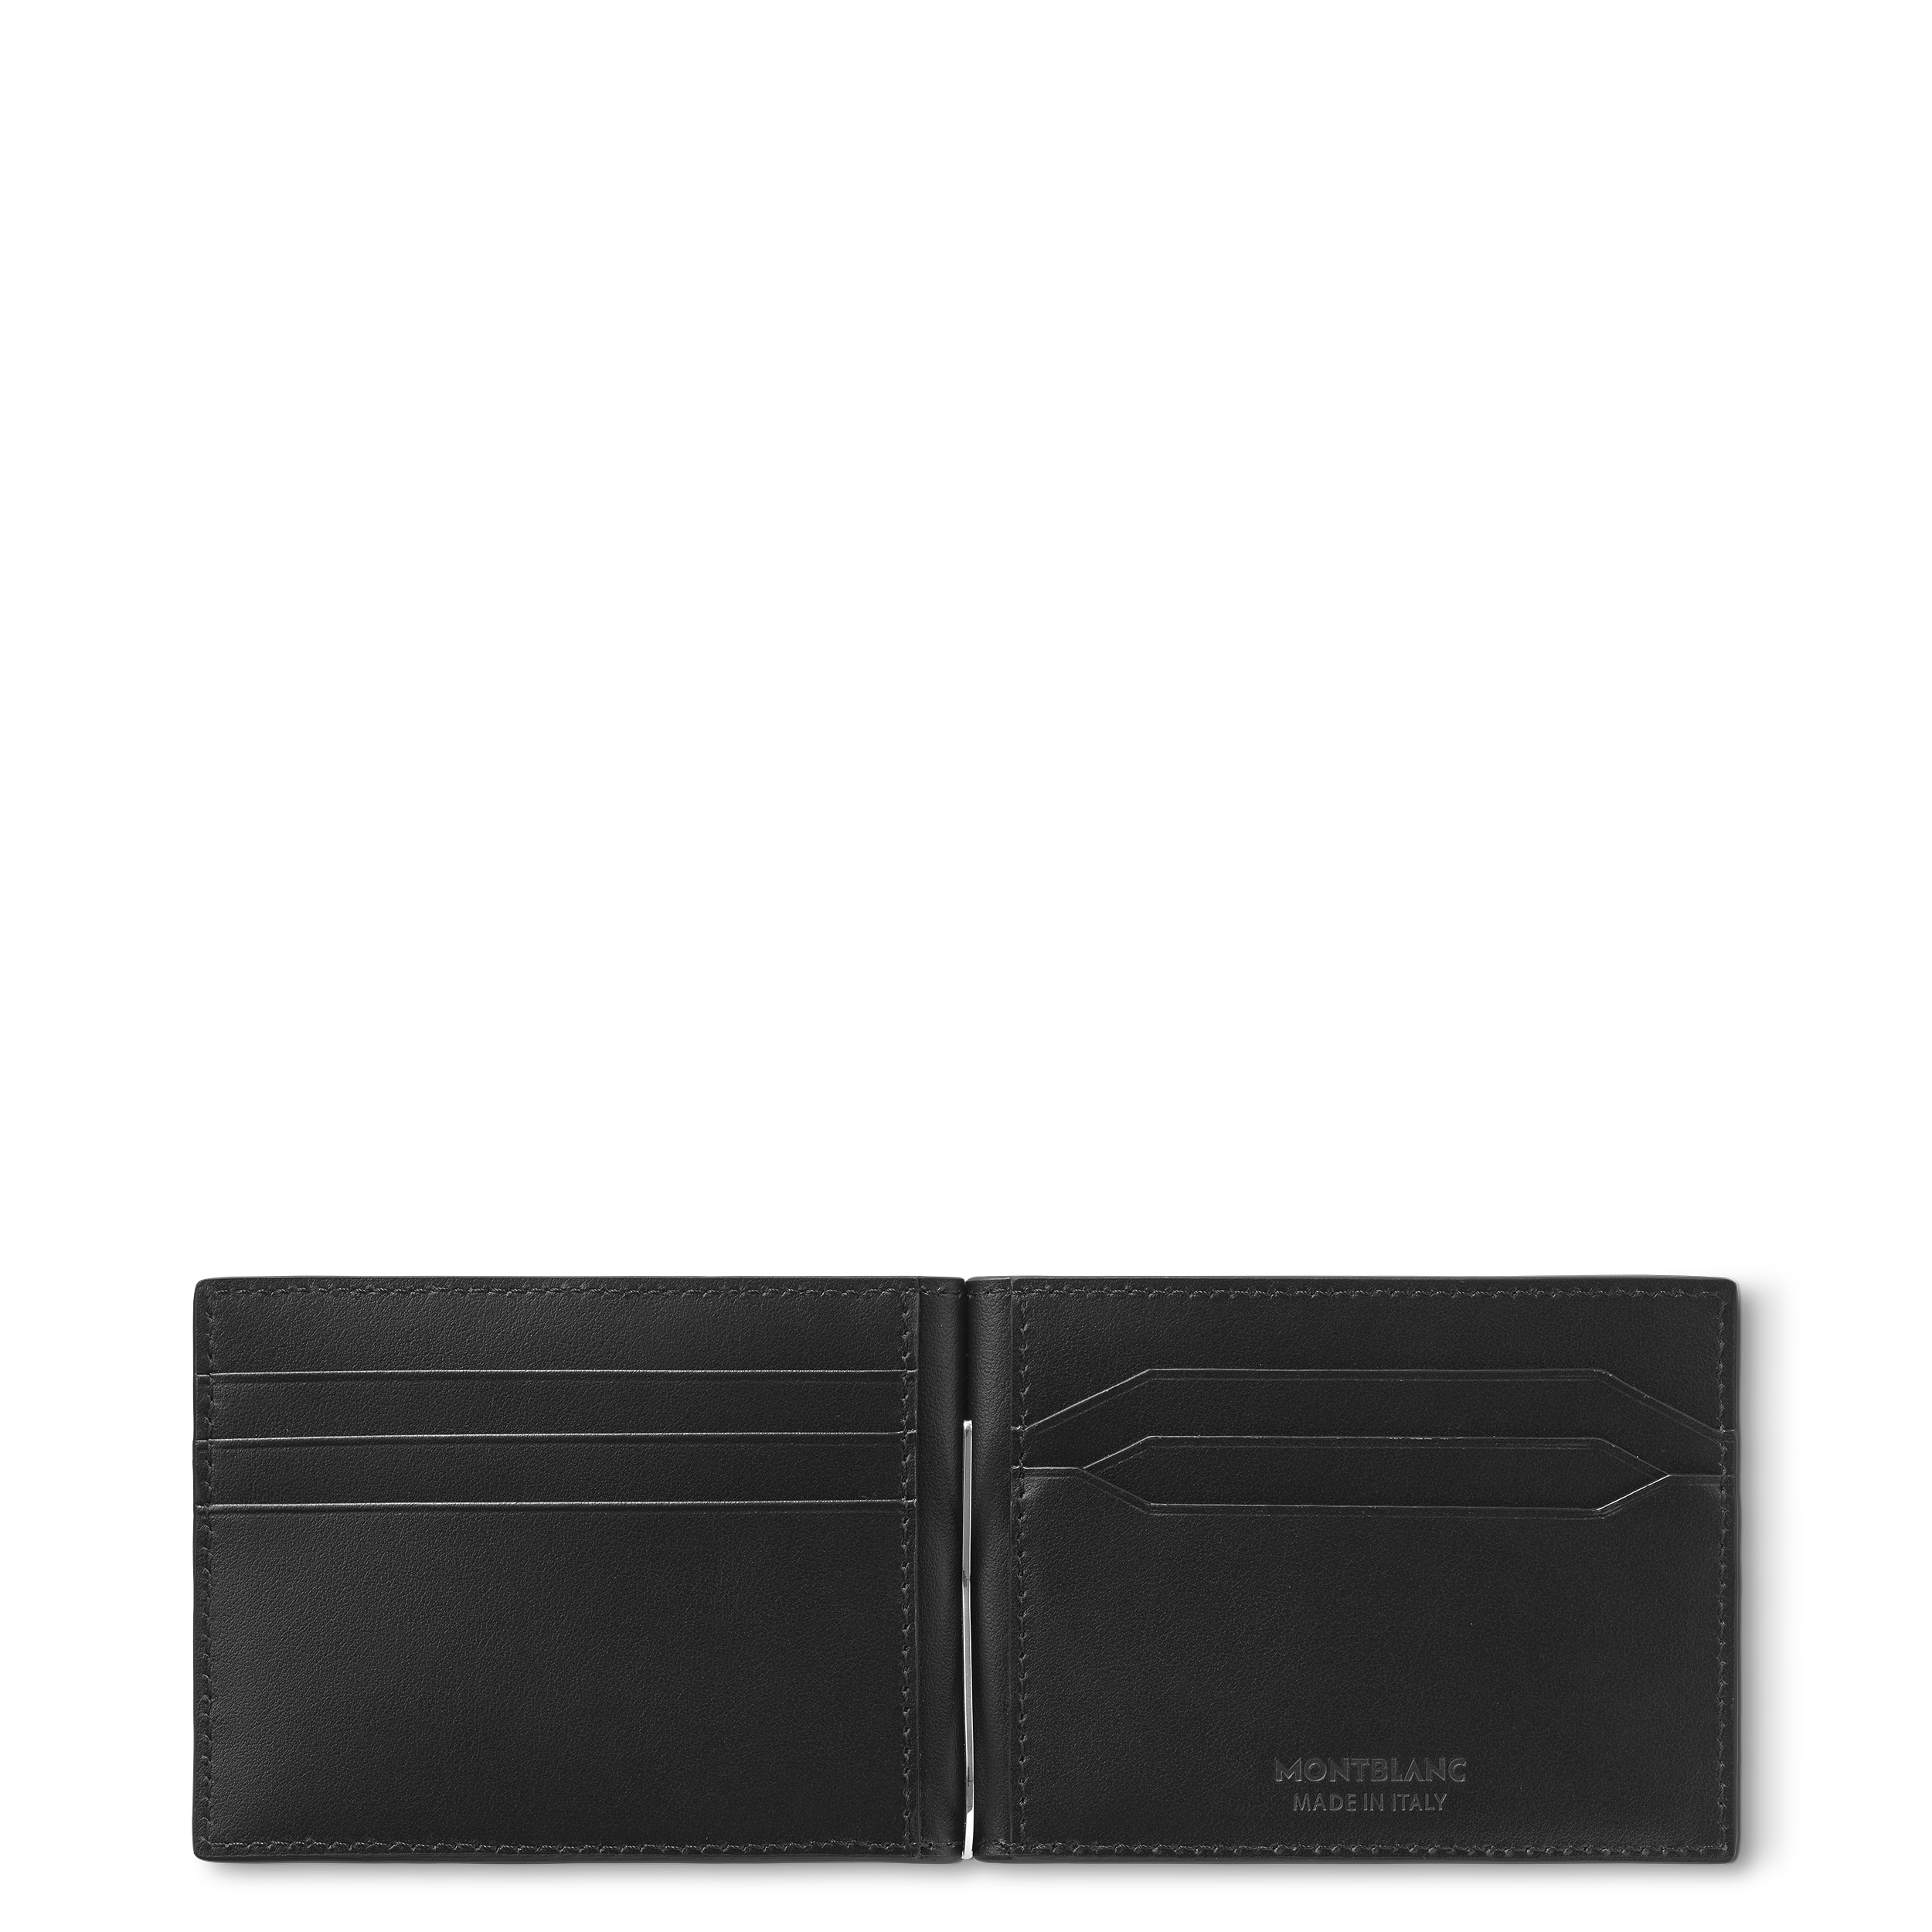 Montblanc Extreme 3.0 wallet 6cc with money clip, image 9